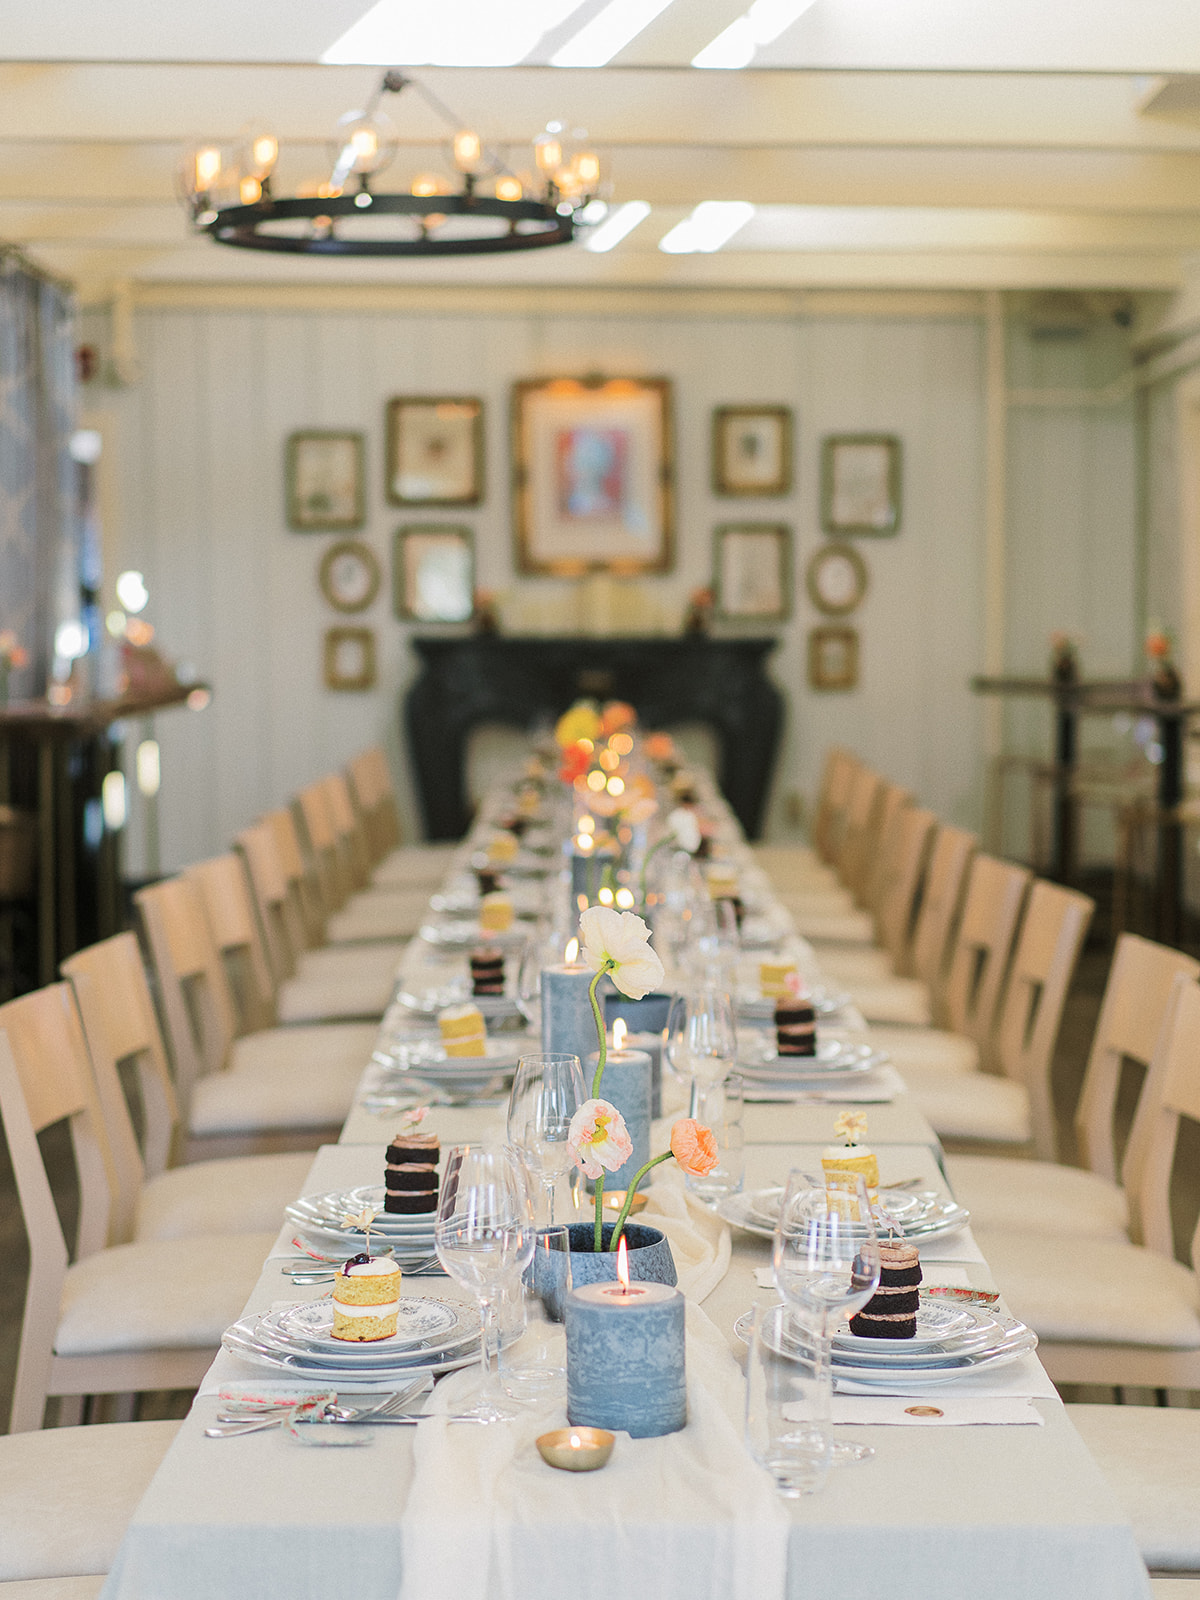 family style wedding table with sage green linen, textured pillar candles, Icelandic poppy ikebana centerpieces and mini naked cakes at each place setting for an intimate Charleston wedding planned by Willow and Oak and captured by Kylee Yee